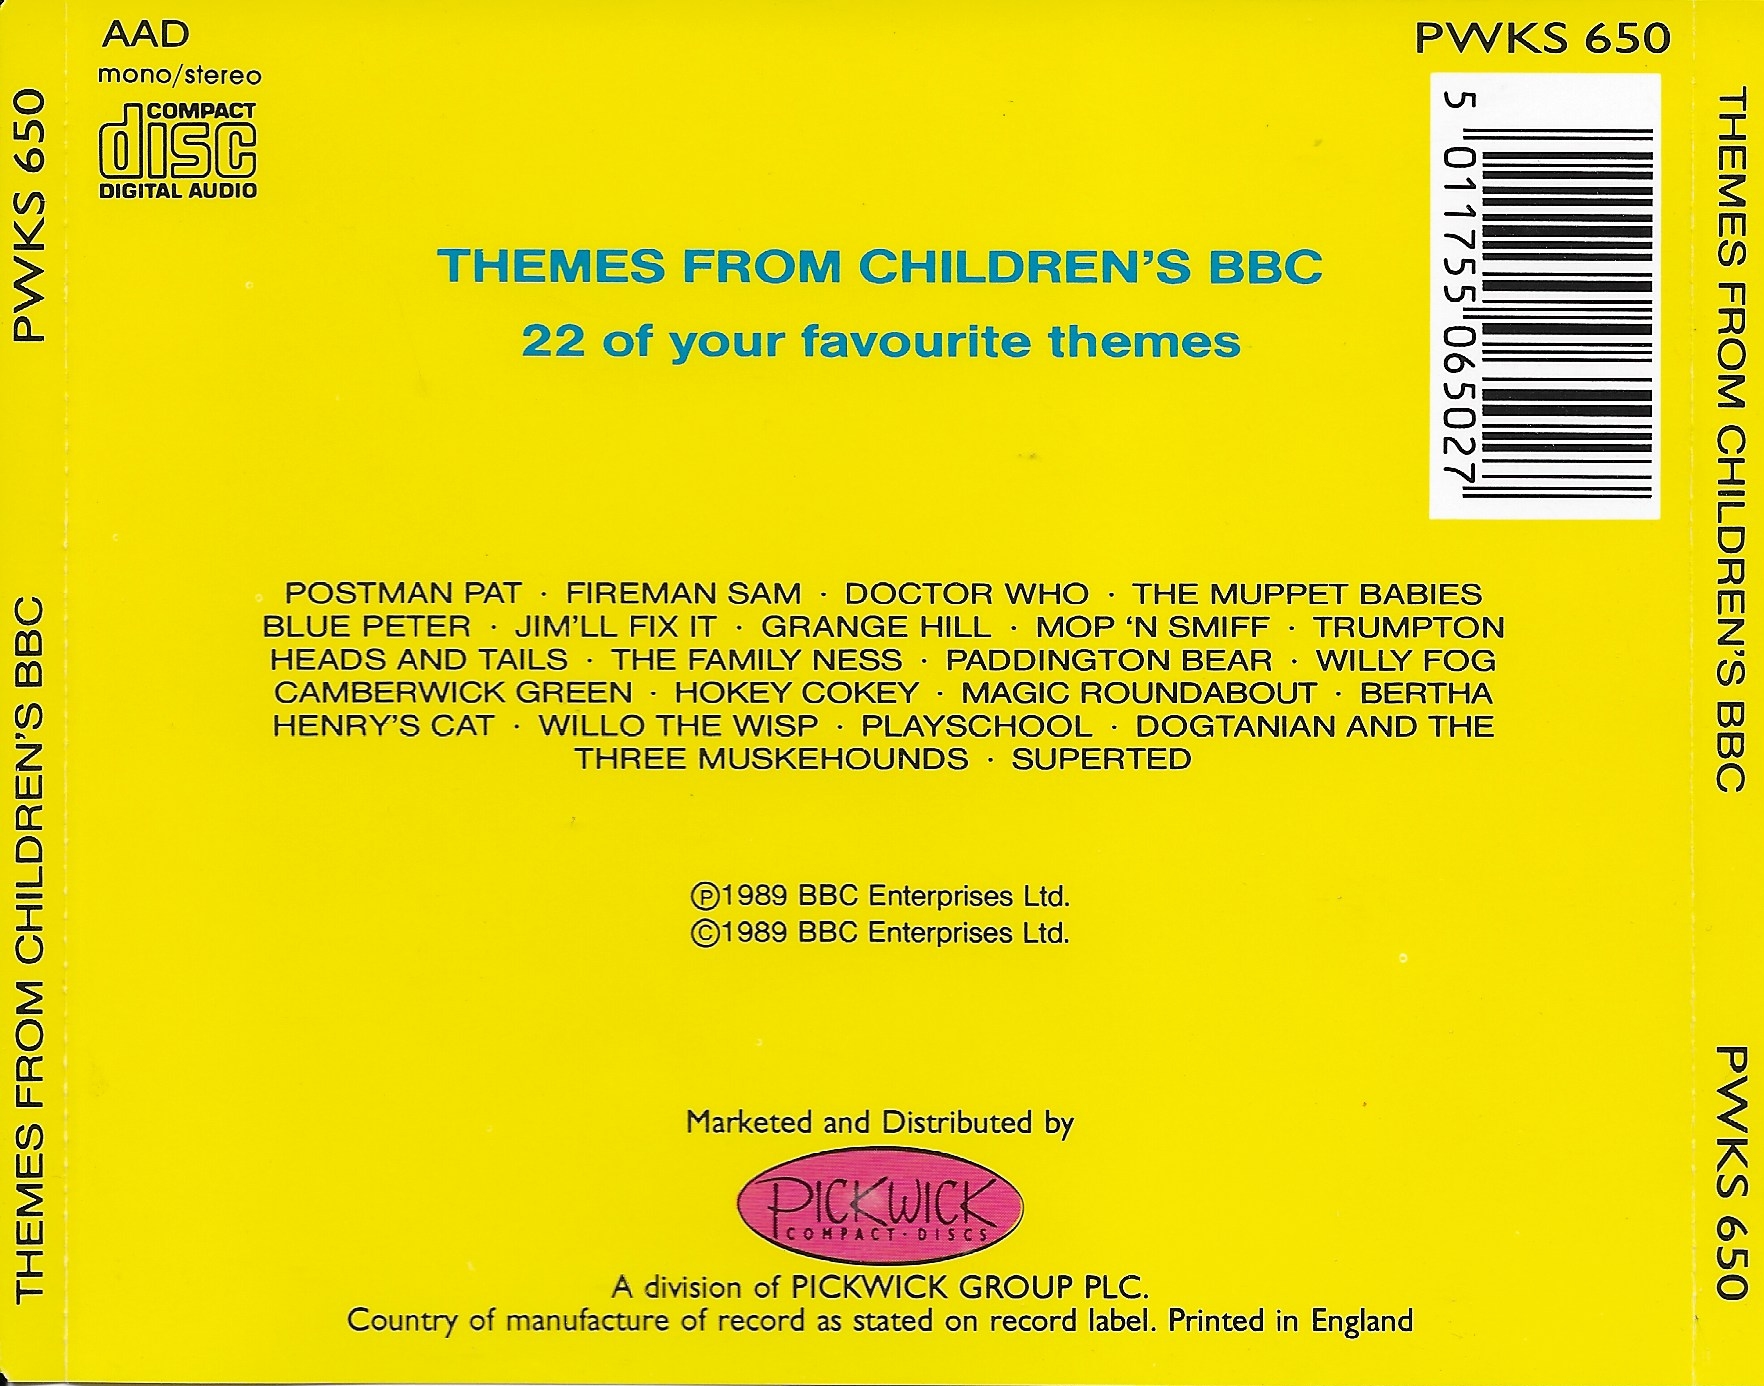 Back cover of PWKS 650